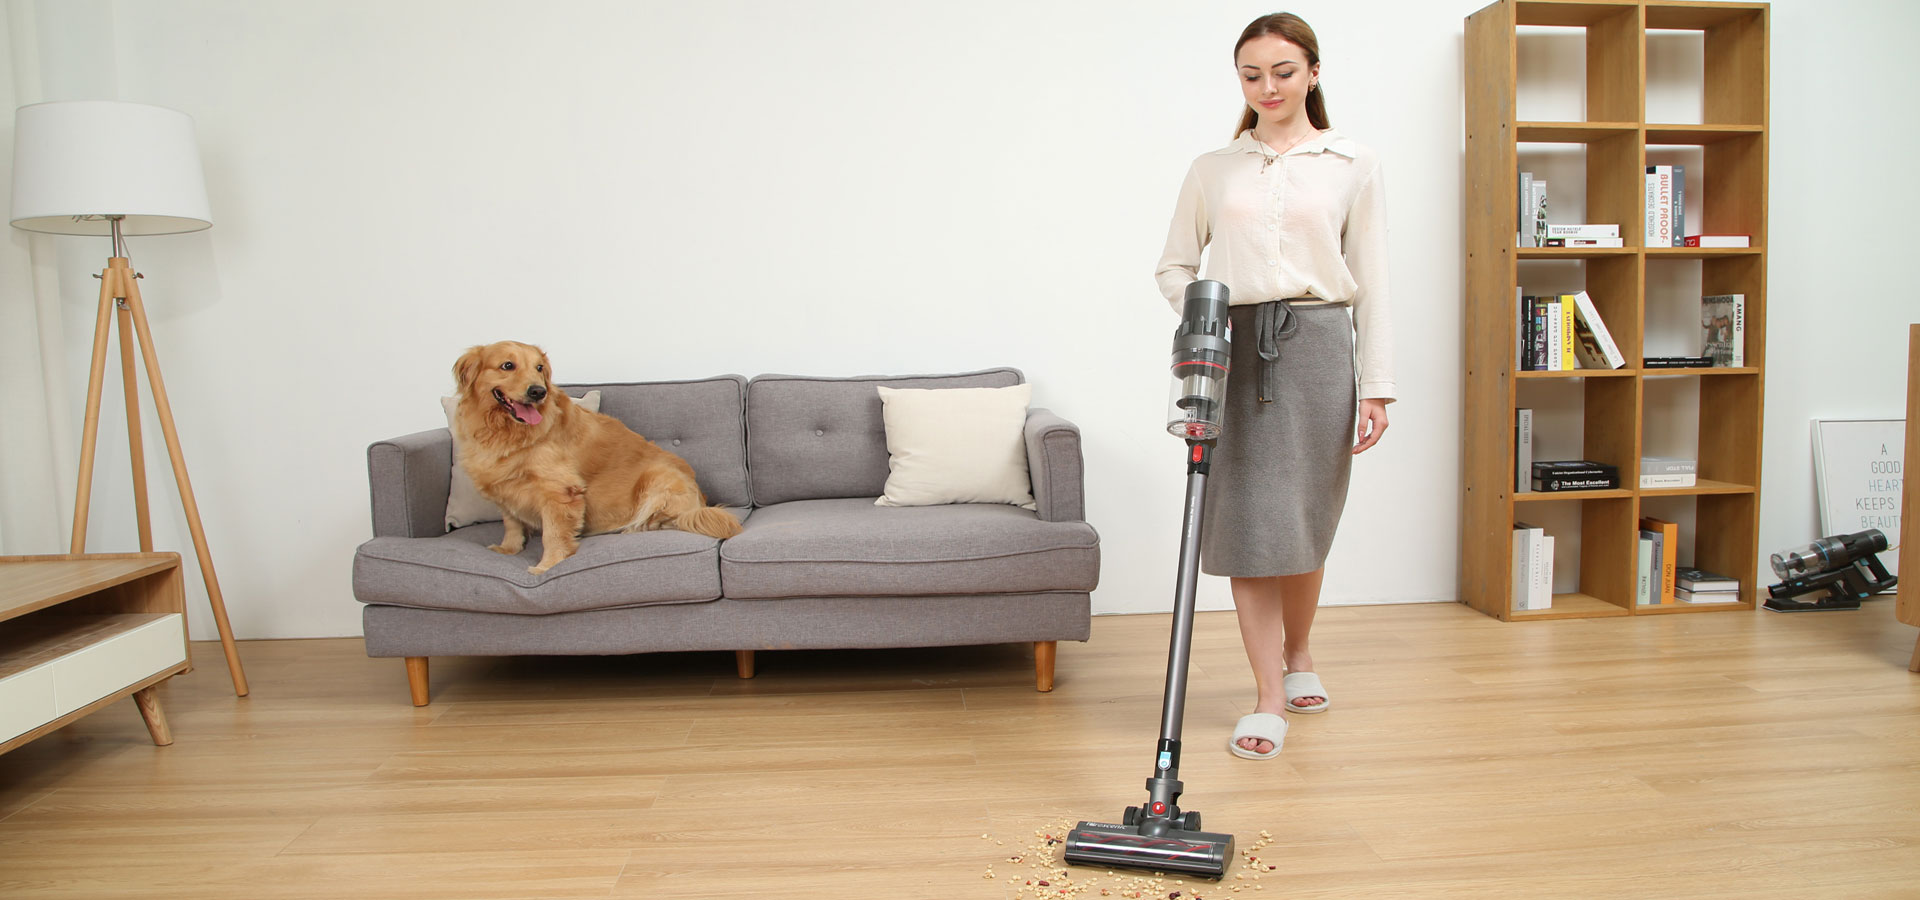 Reviews & Price of 2021: Kirby vs Dyson Vacuum Cleaners